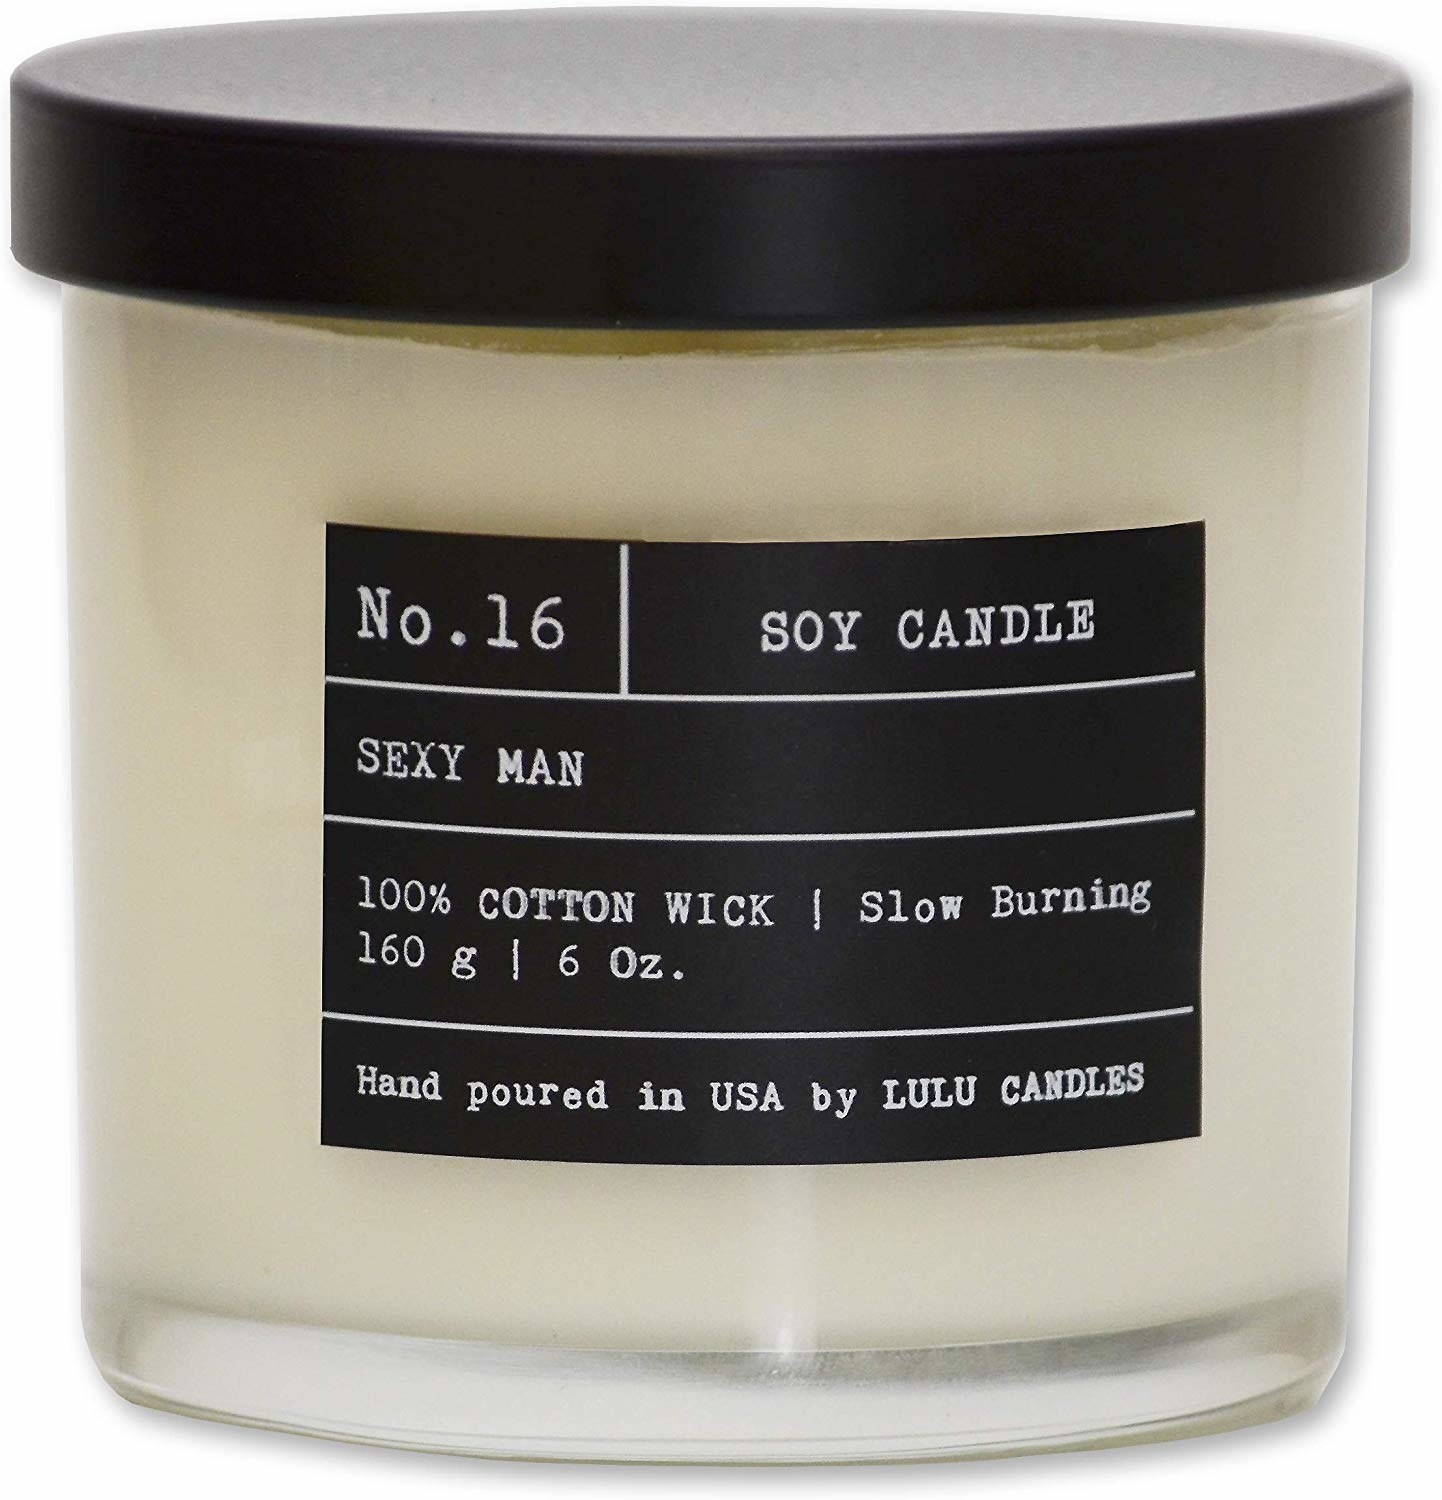 The Sexy Man soy candle.